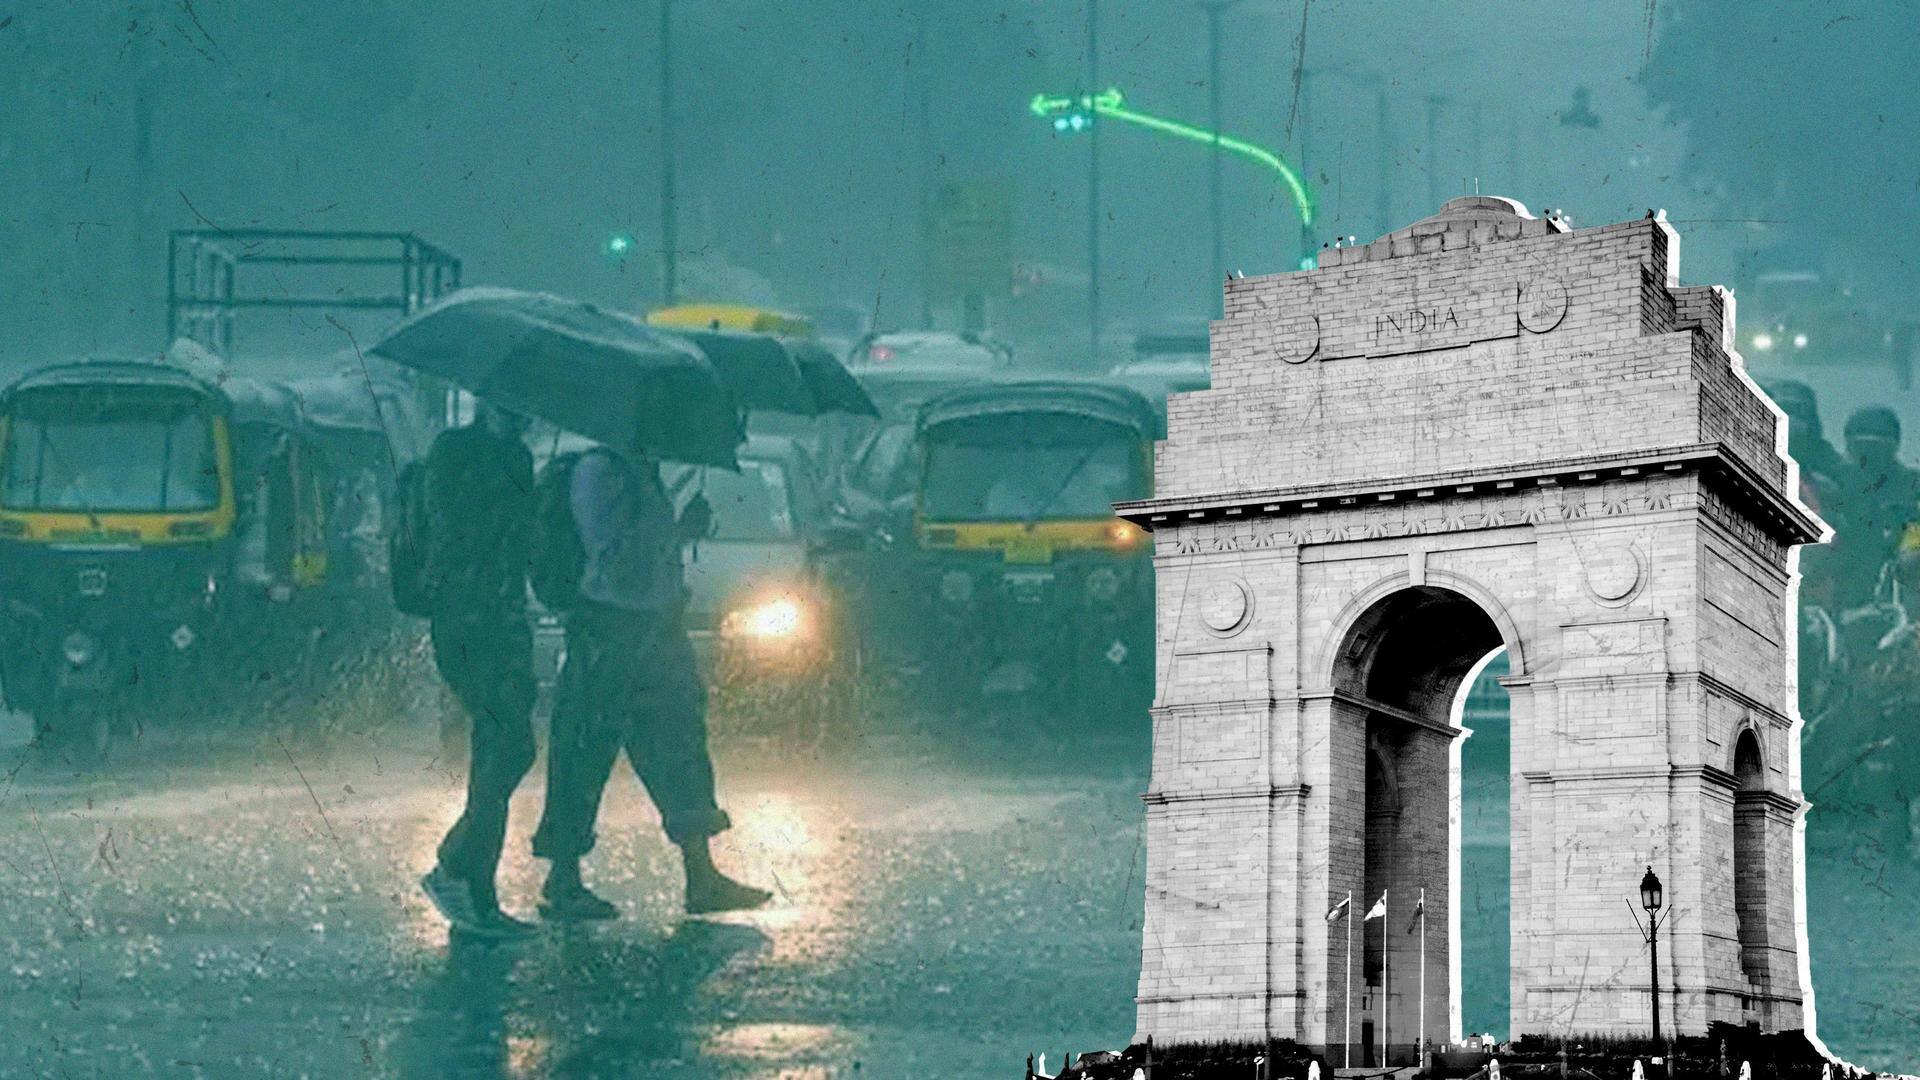 Delhi wakes up to high winds, rain; IMD predicts thunderstorm